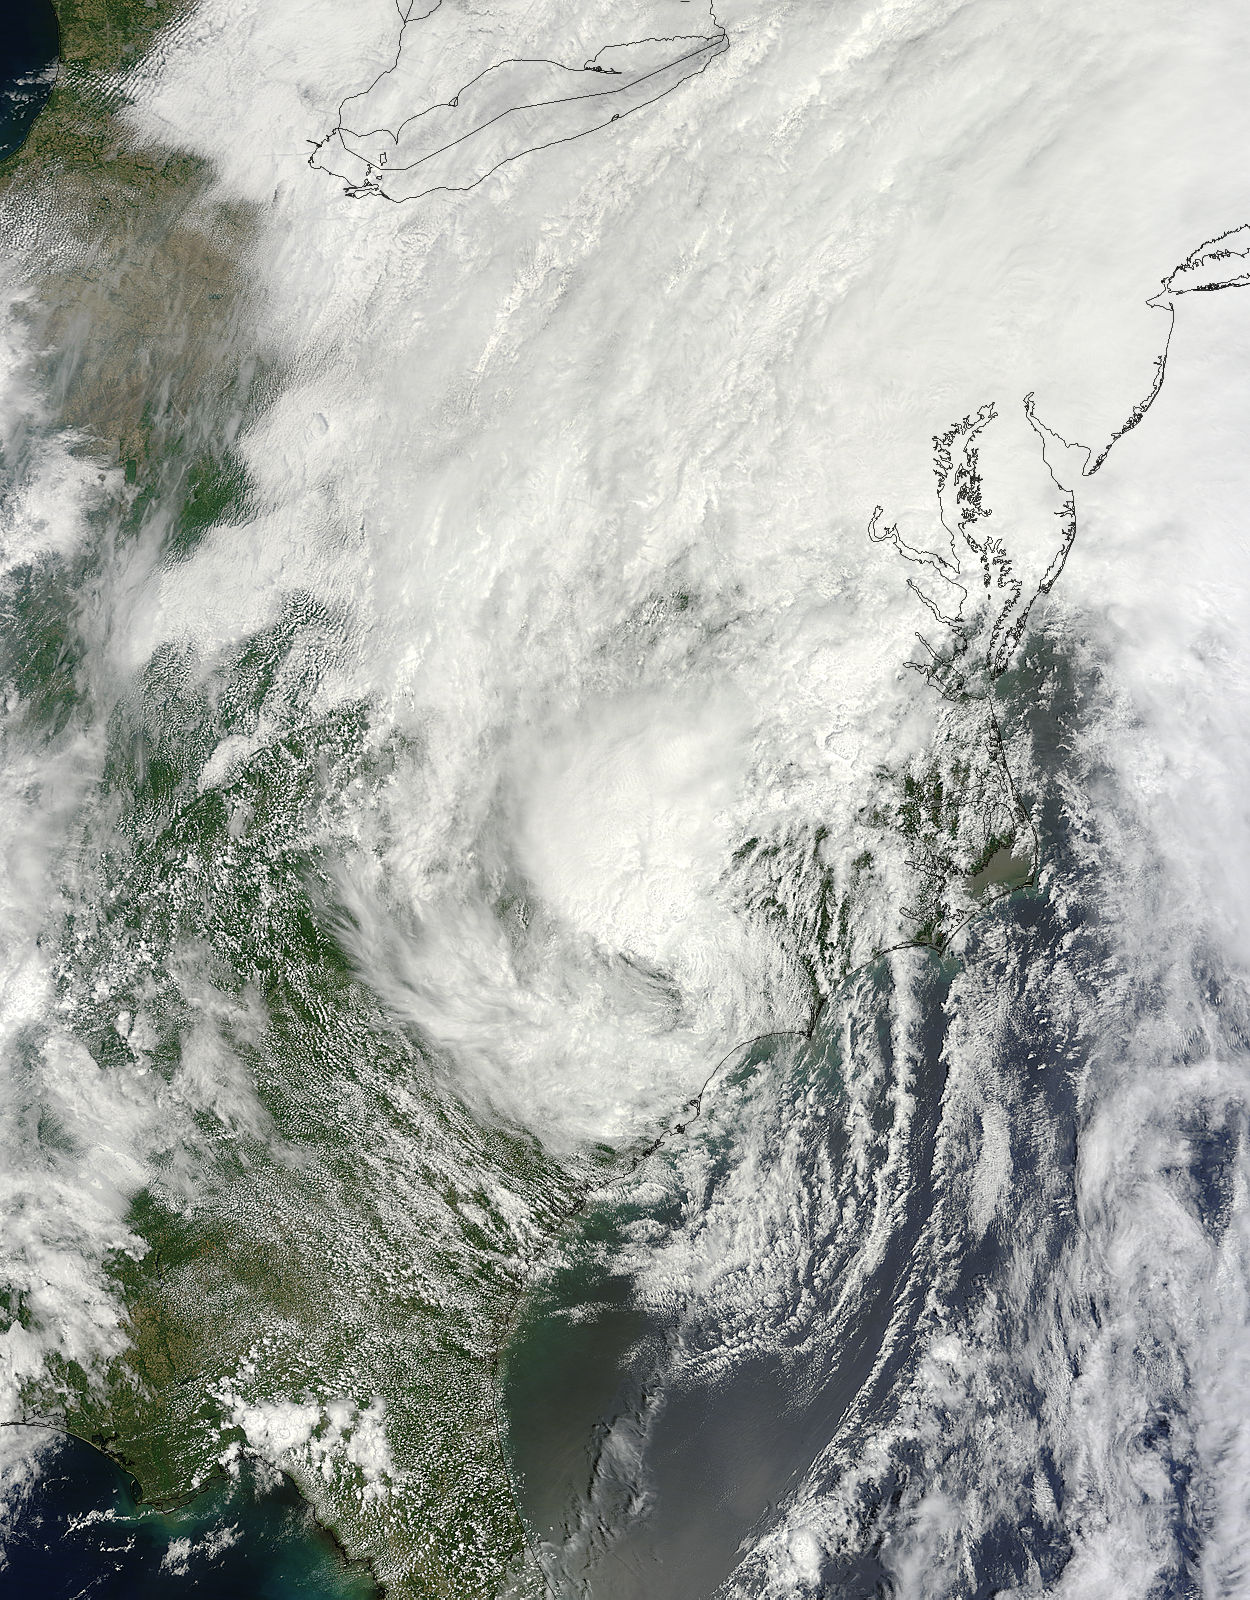 Tropical Storm Andrea (01L) over southeastern United States - related image preview